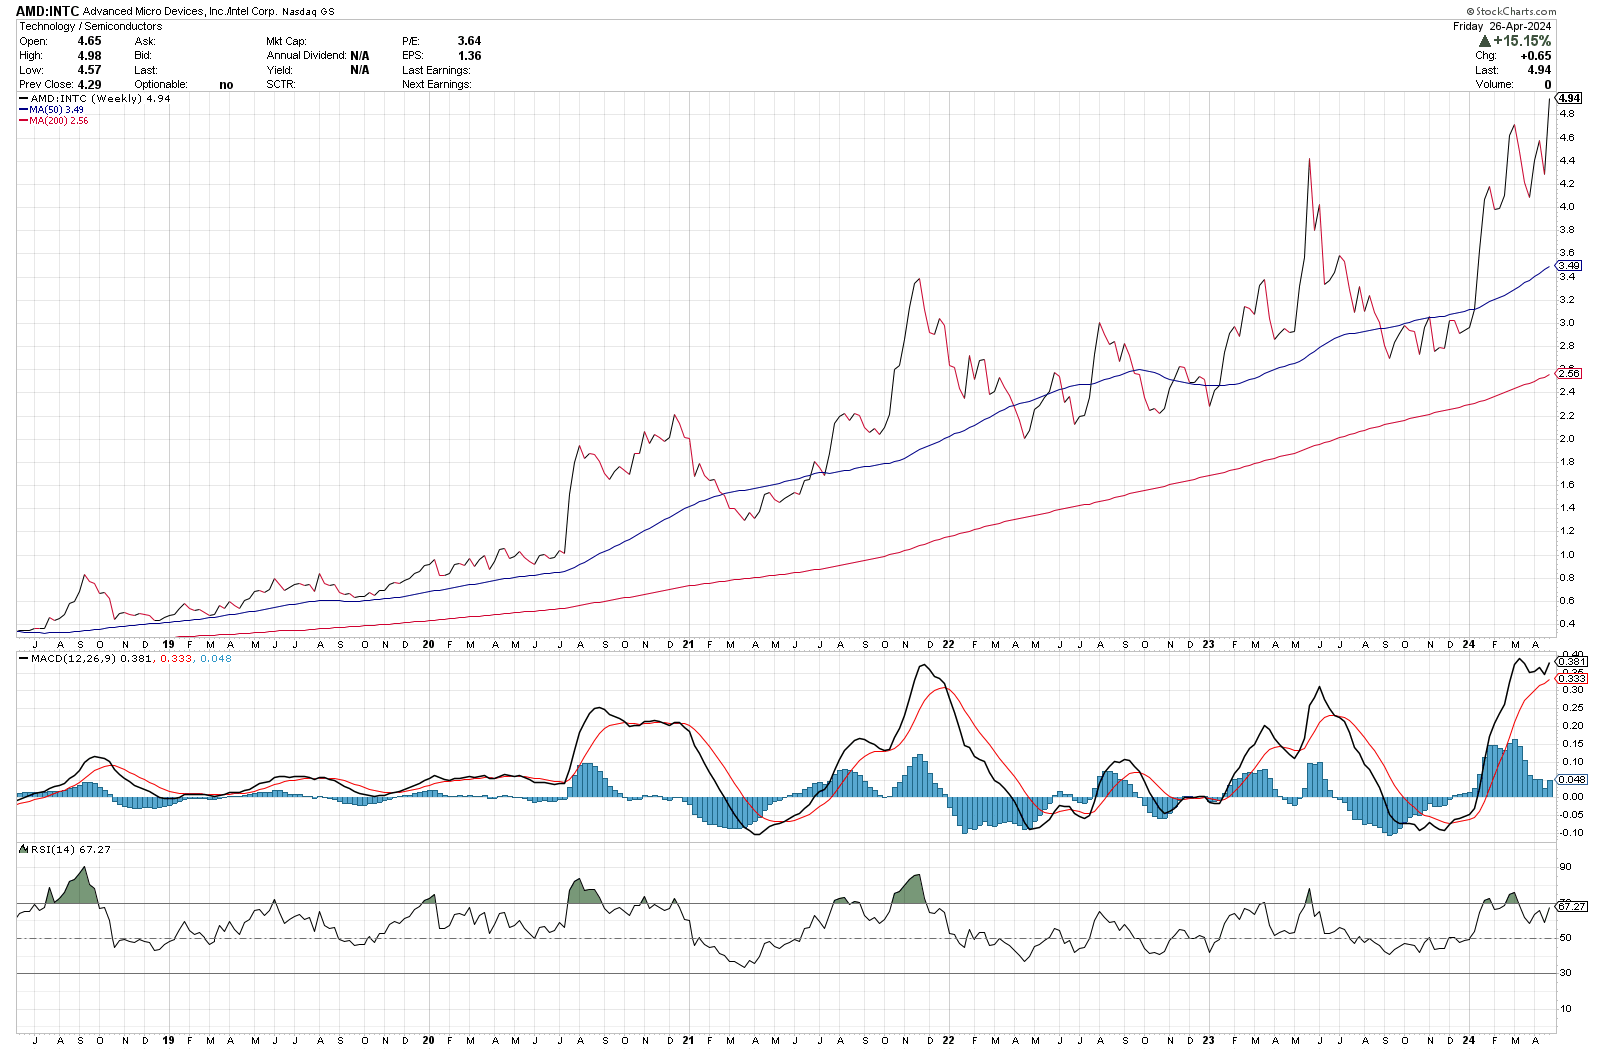 AMD analysis for April 29